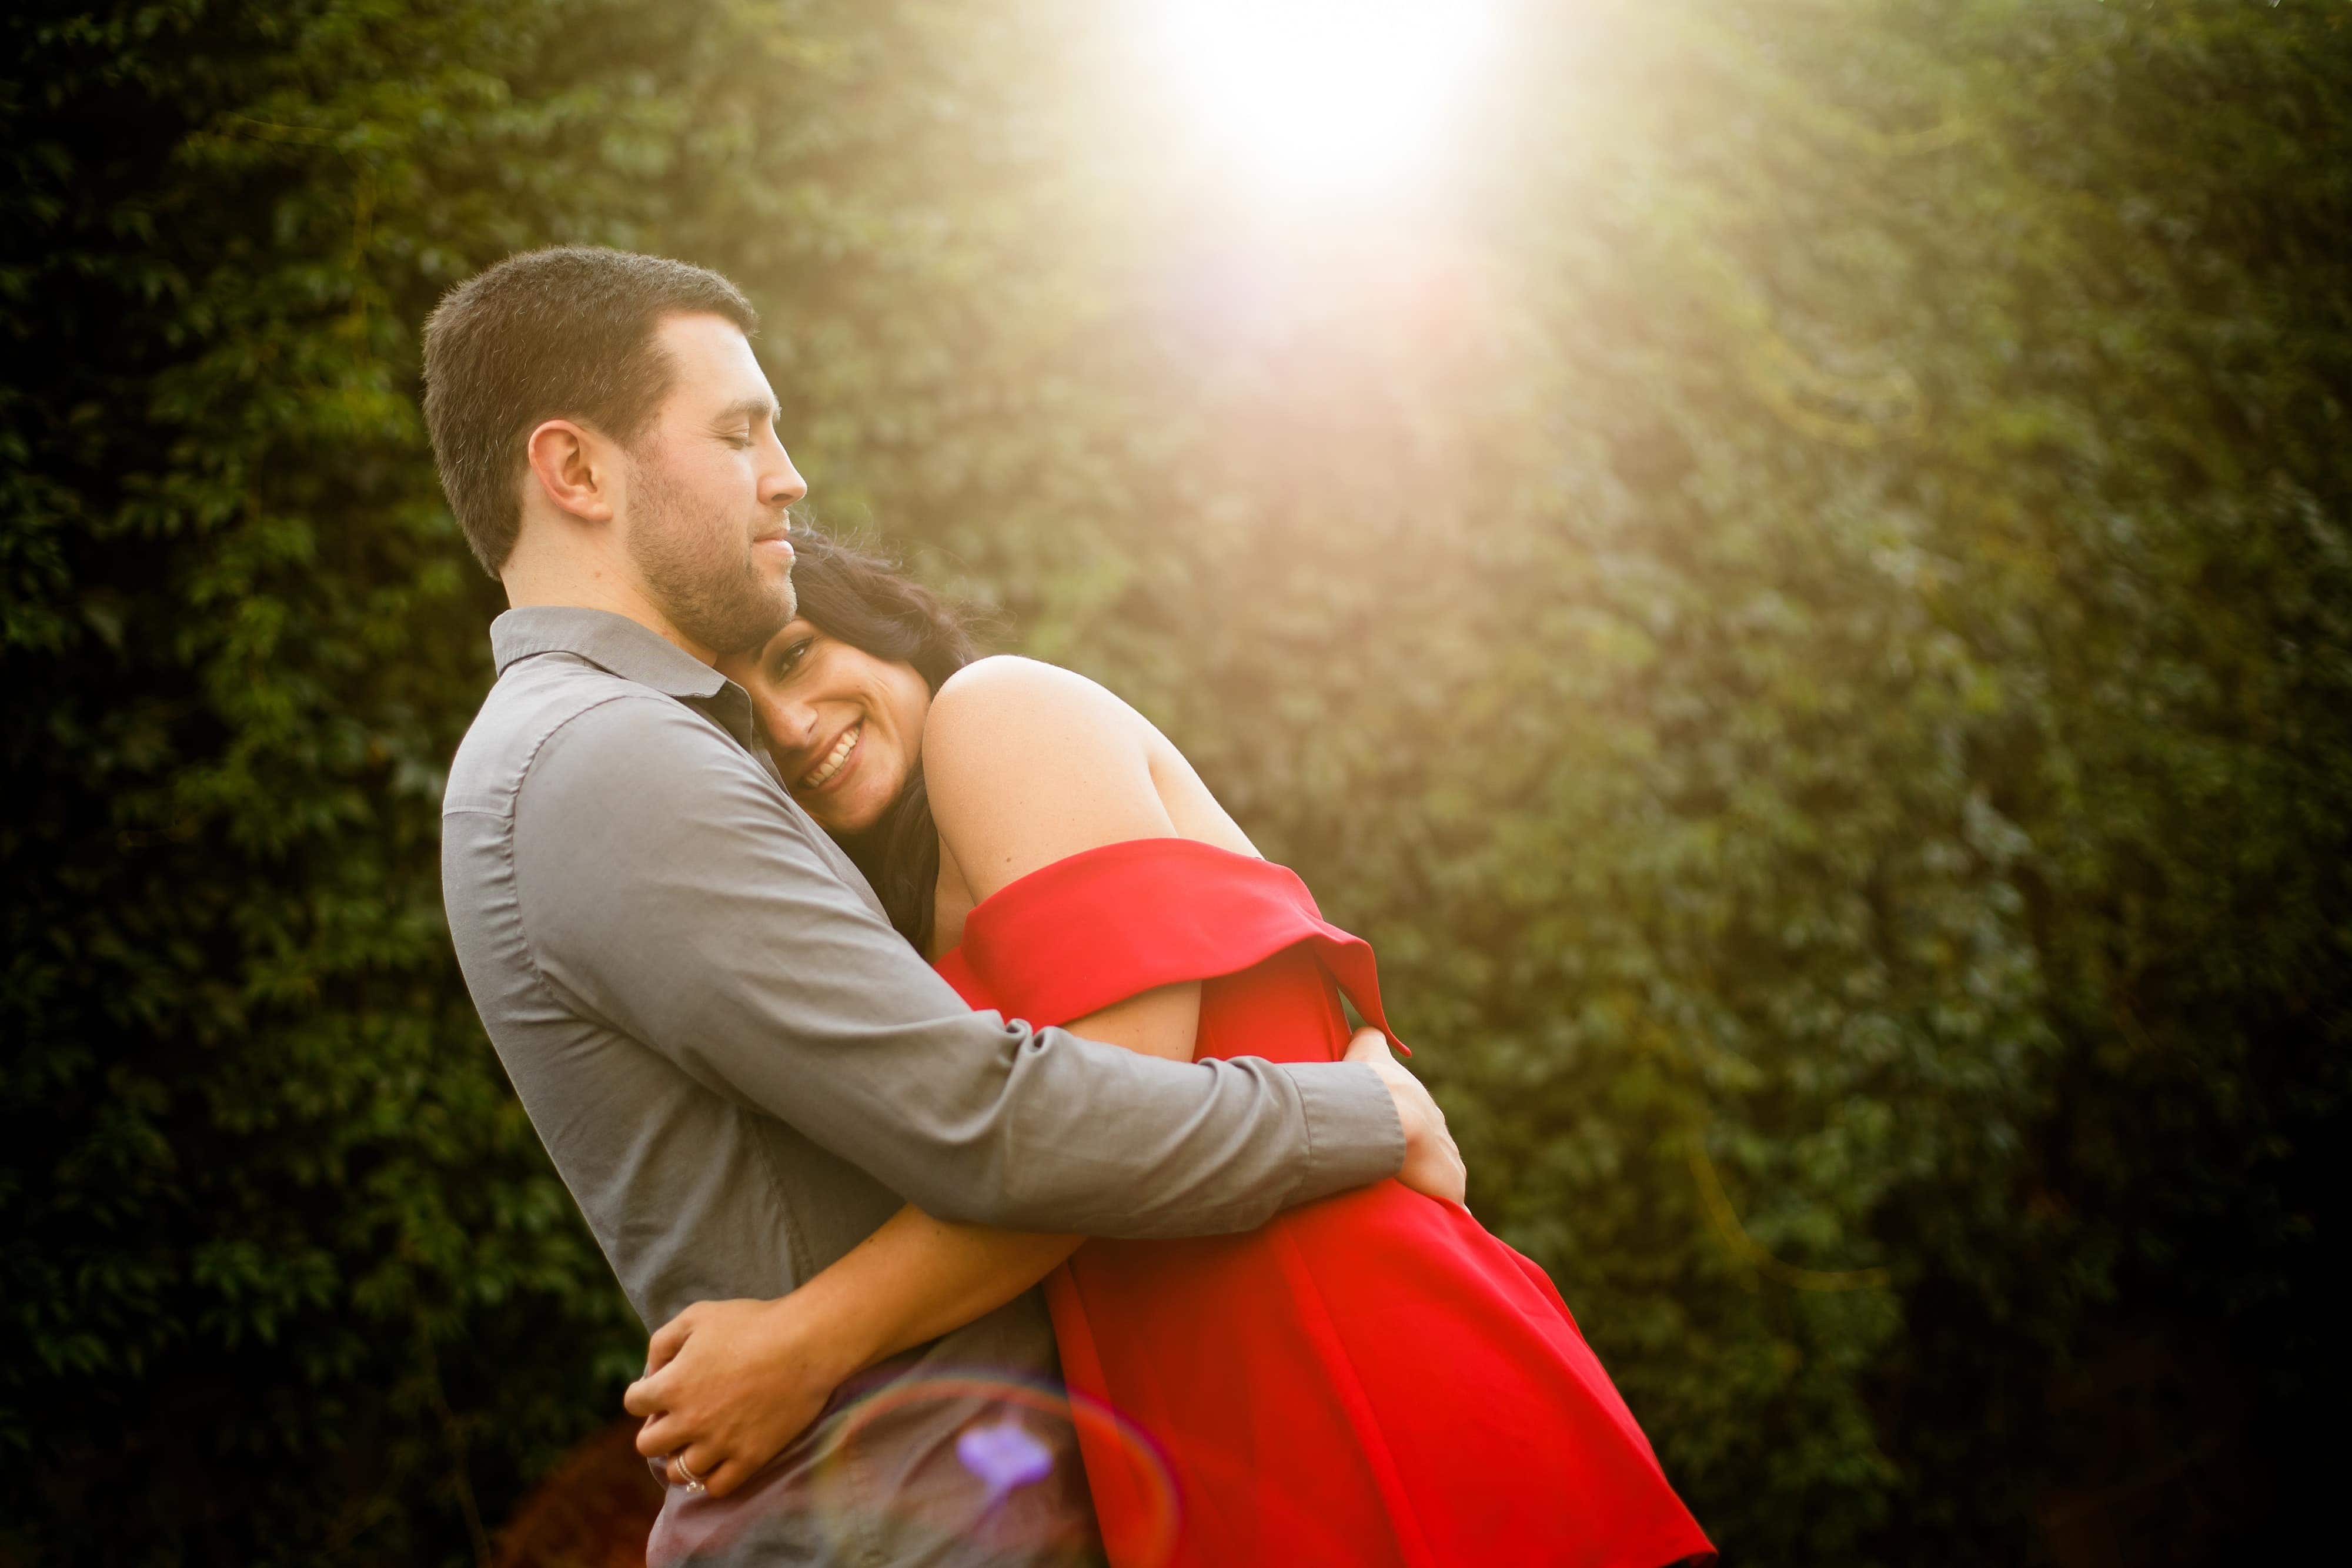 The sun flares in past a smiling Danielle and Jordan during their engagement session in Denver